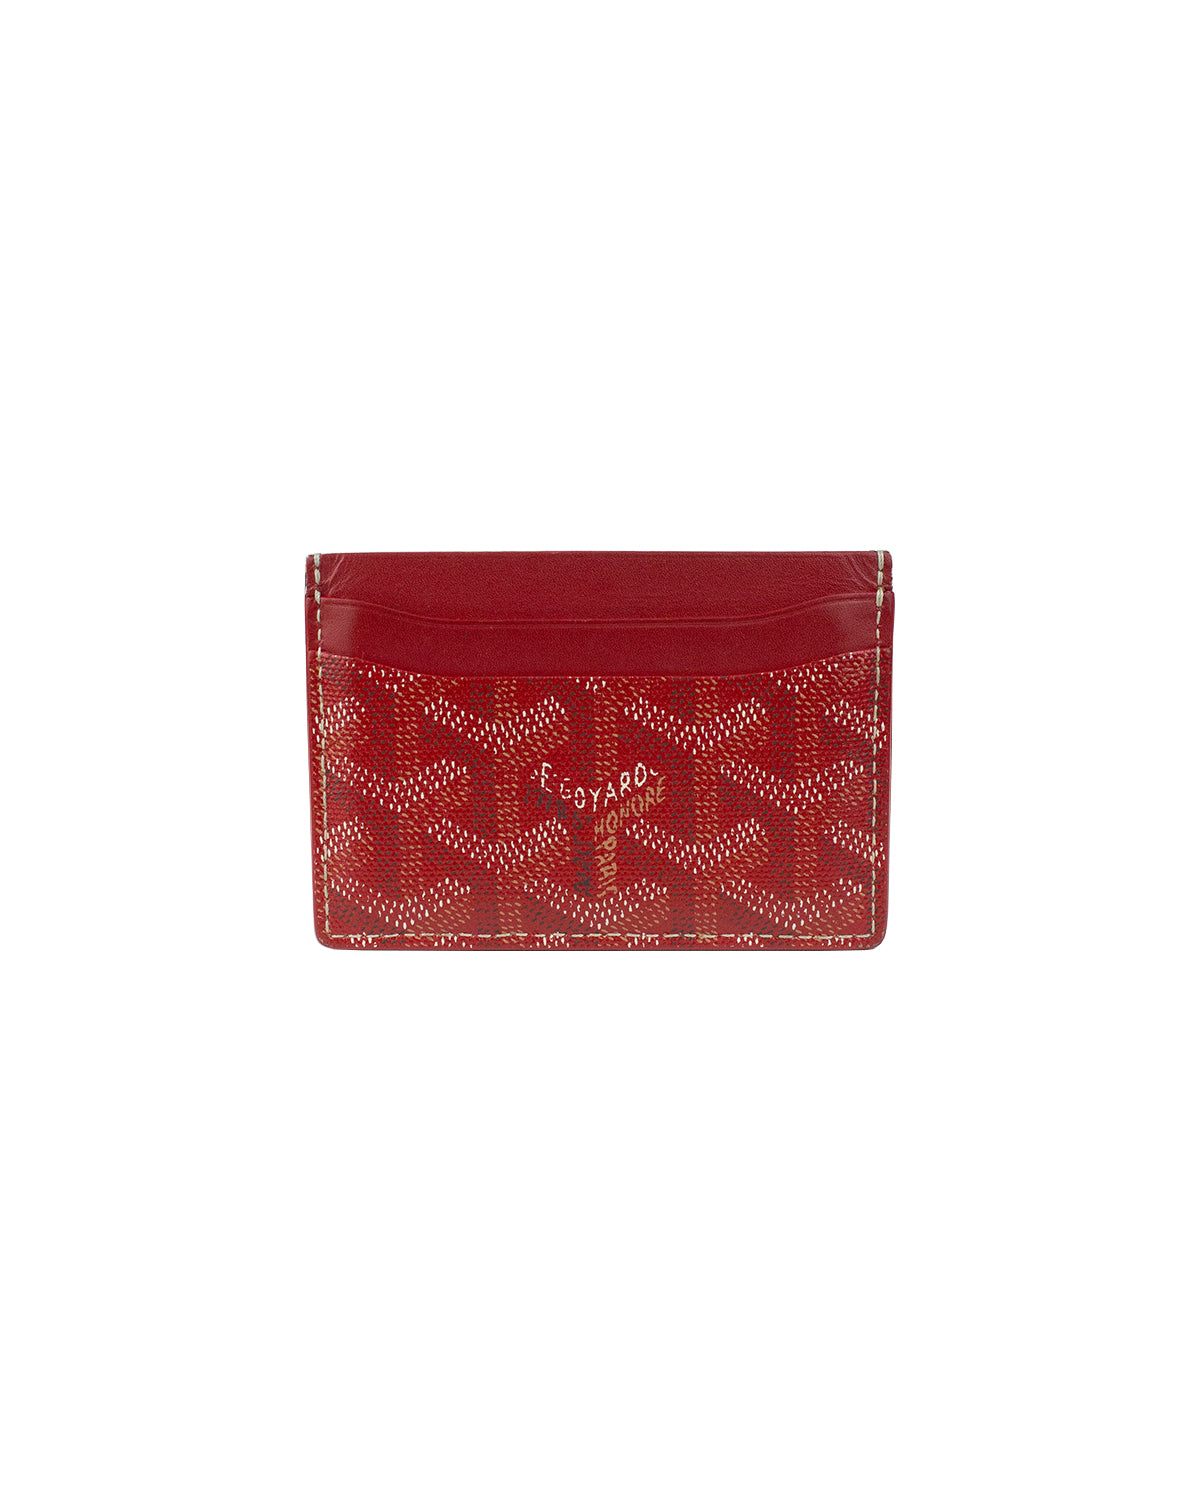 Louis Vuitton - Authenticated Saint Sulpice Handbag - Leather Red for Women, Very Good Condition